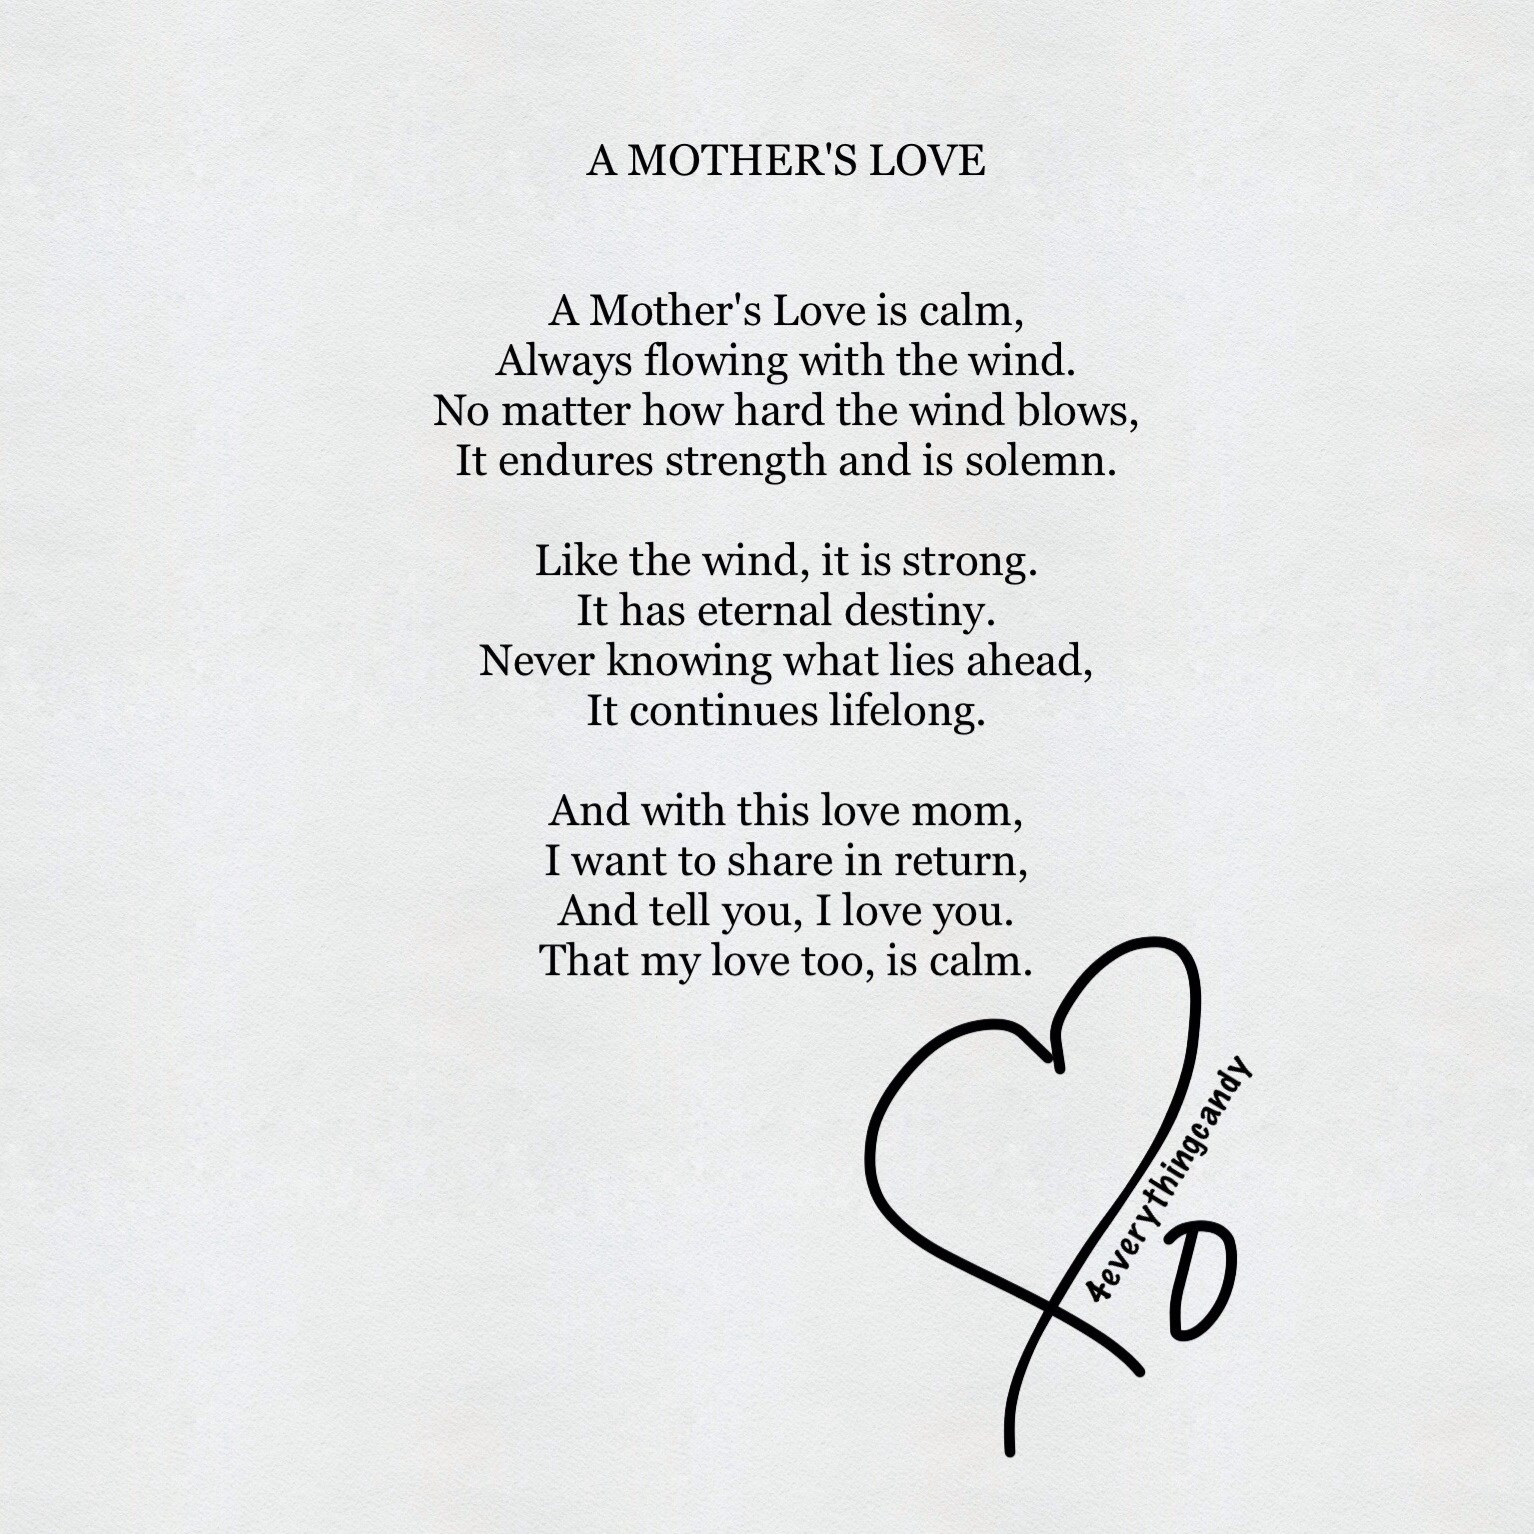 A Mother's Love | 4everythingcandy